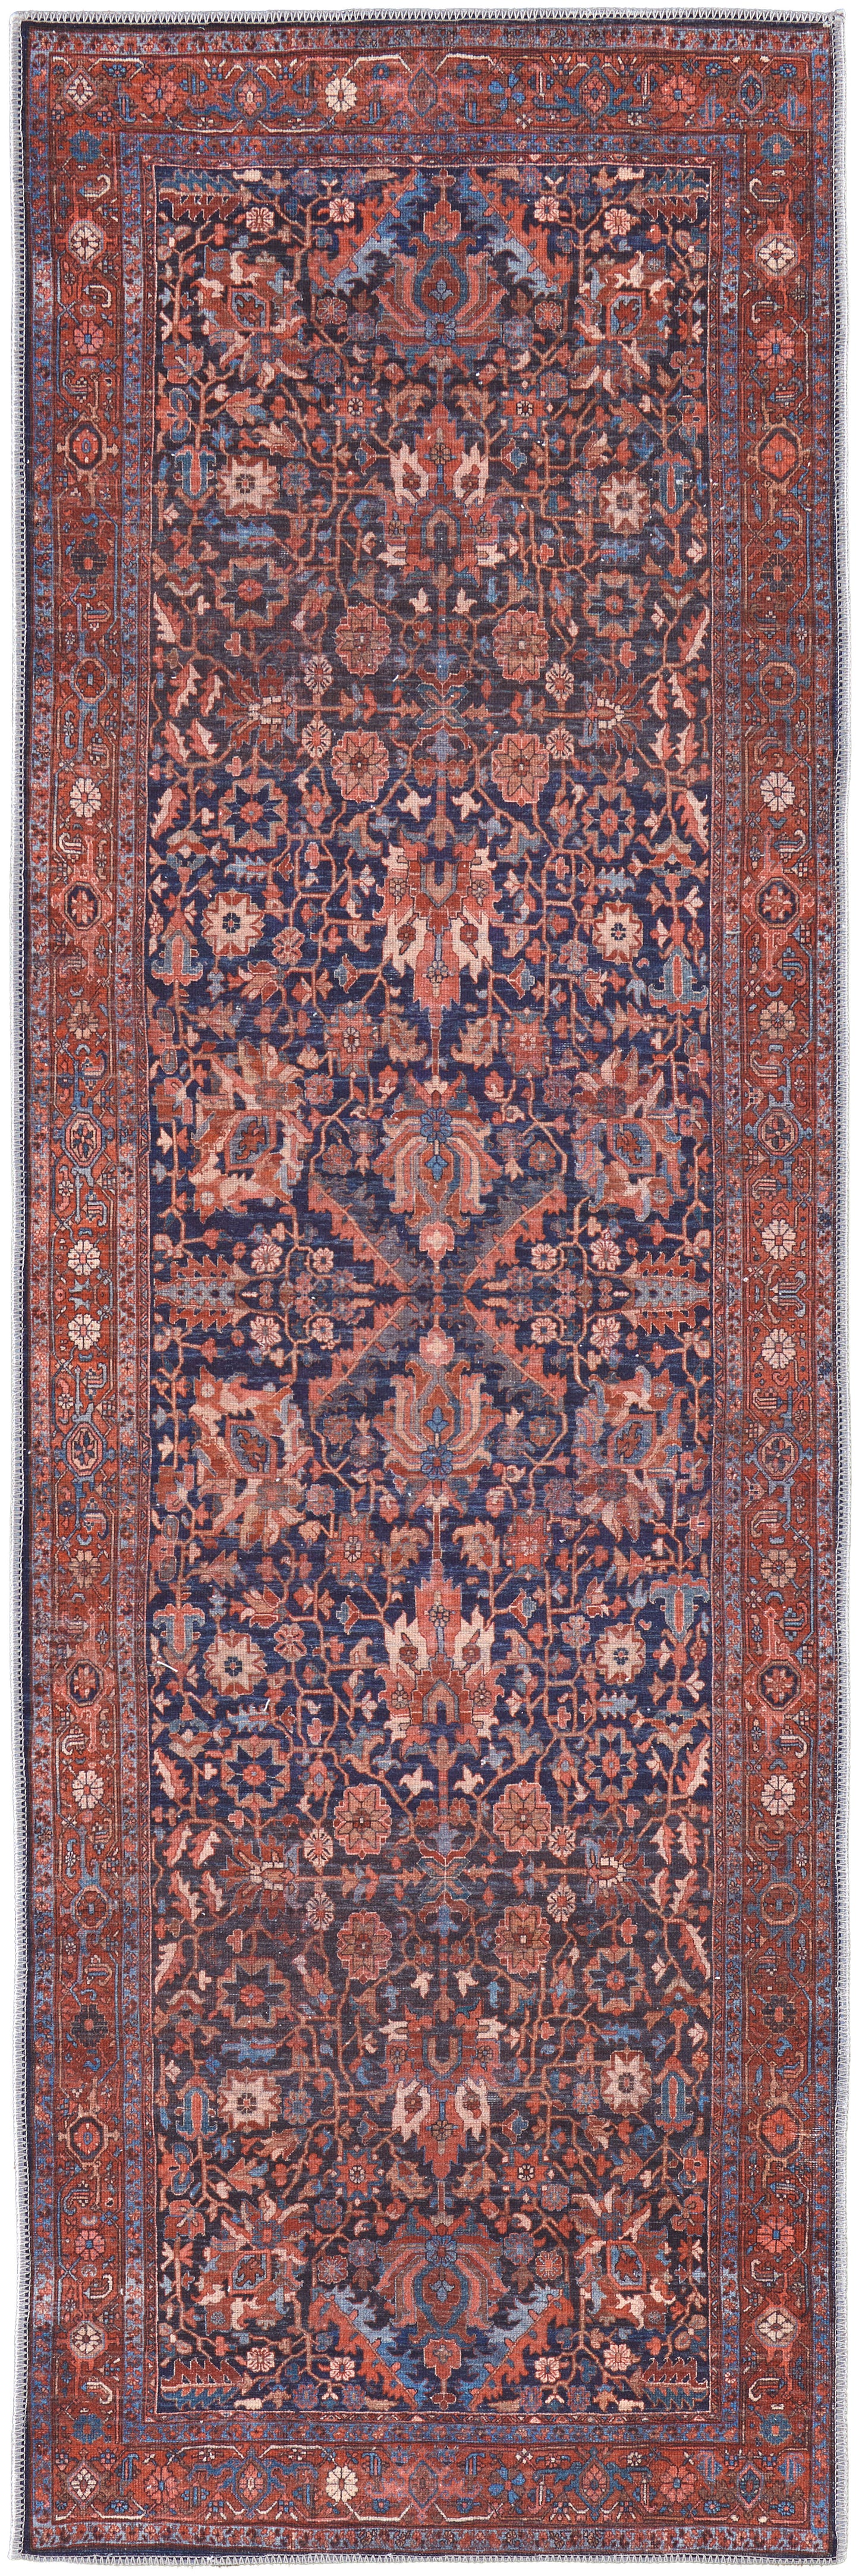 Rawlins 39HIF Power Loomed Synthetic Blend Indoor Area Rug by Feizy Rugs